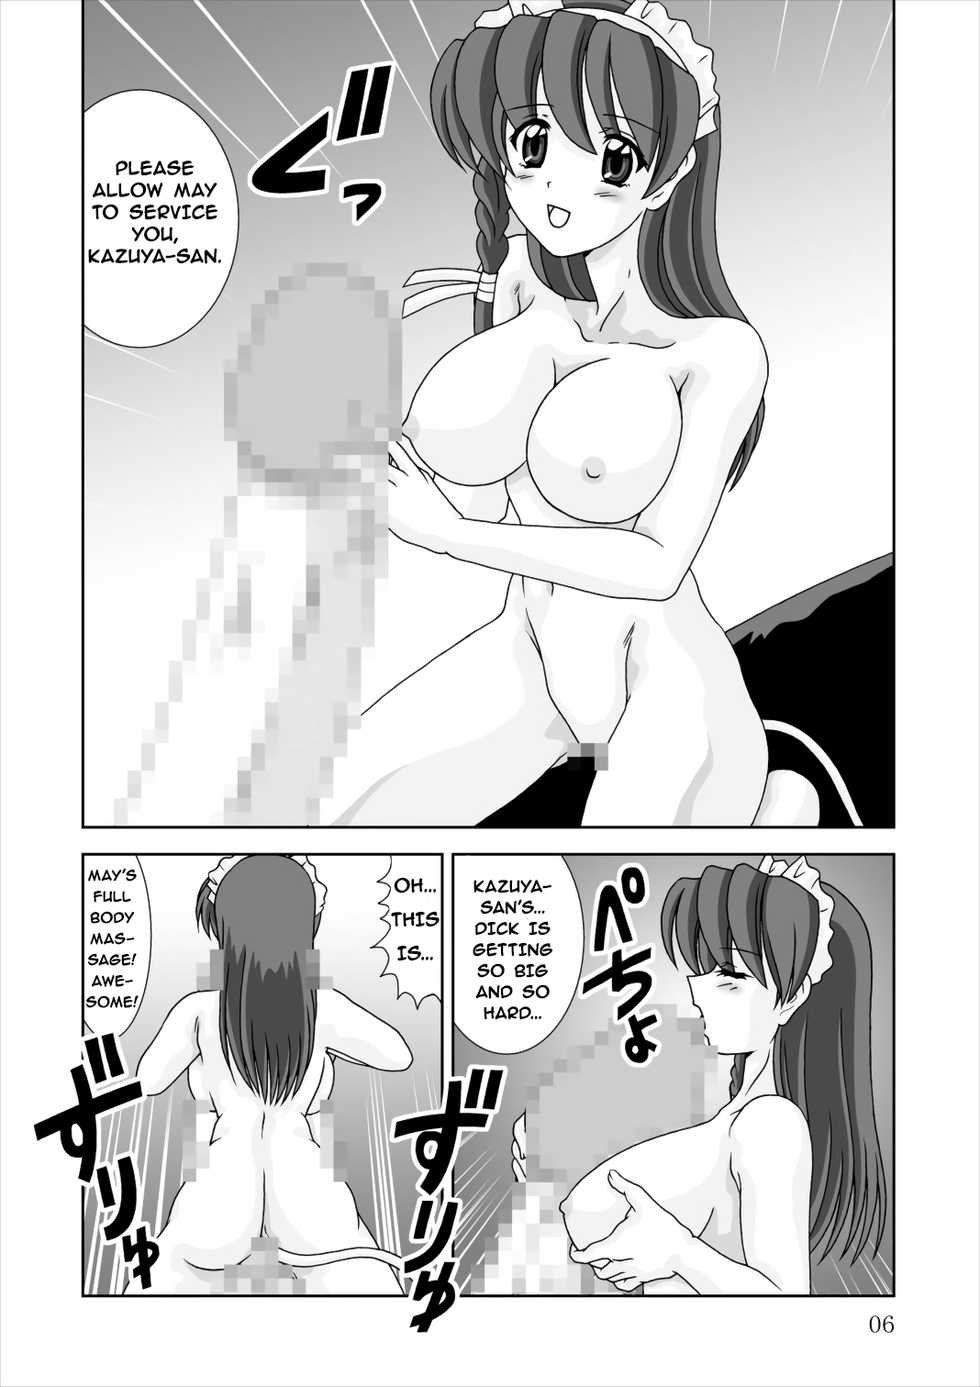 [Mental Specialist (Watanabe Yoshimasa)] Shiboritate | May I Offer a Squeeze? (Hand Maid May) [English] [EHCOVE] [Digital] - Page 6